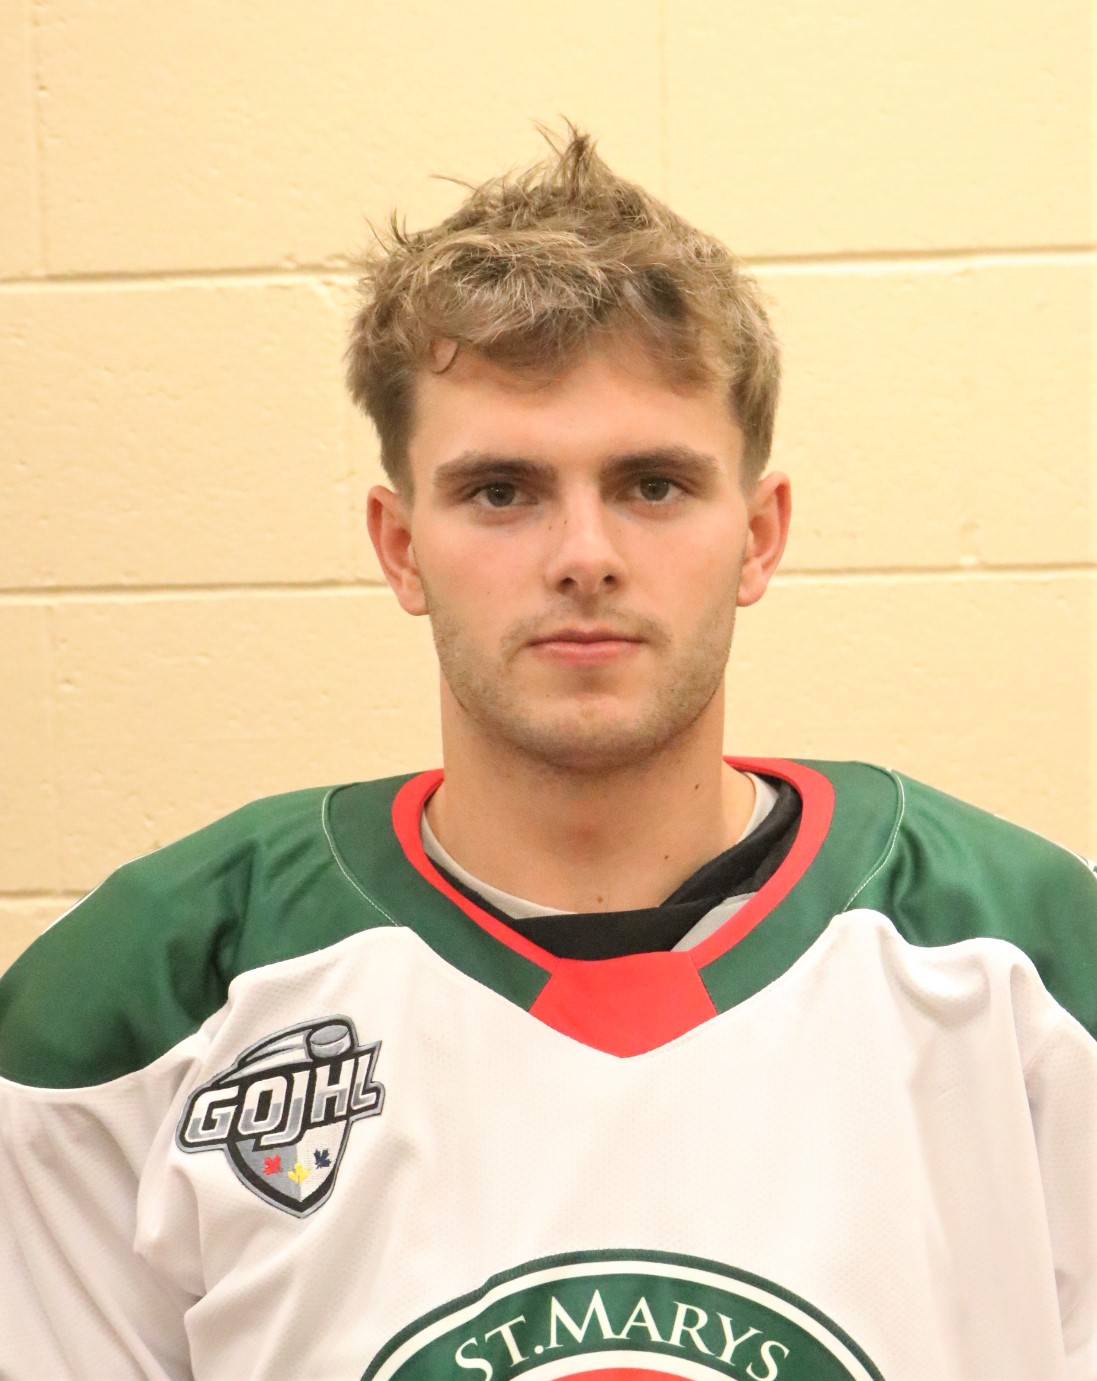 New Lincs’ captain Lamoureux says he will lead by example